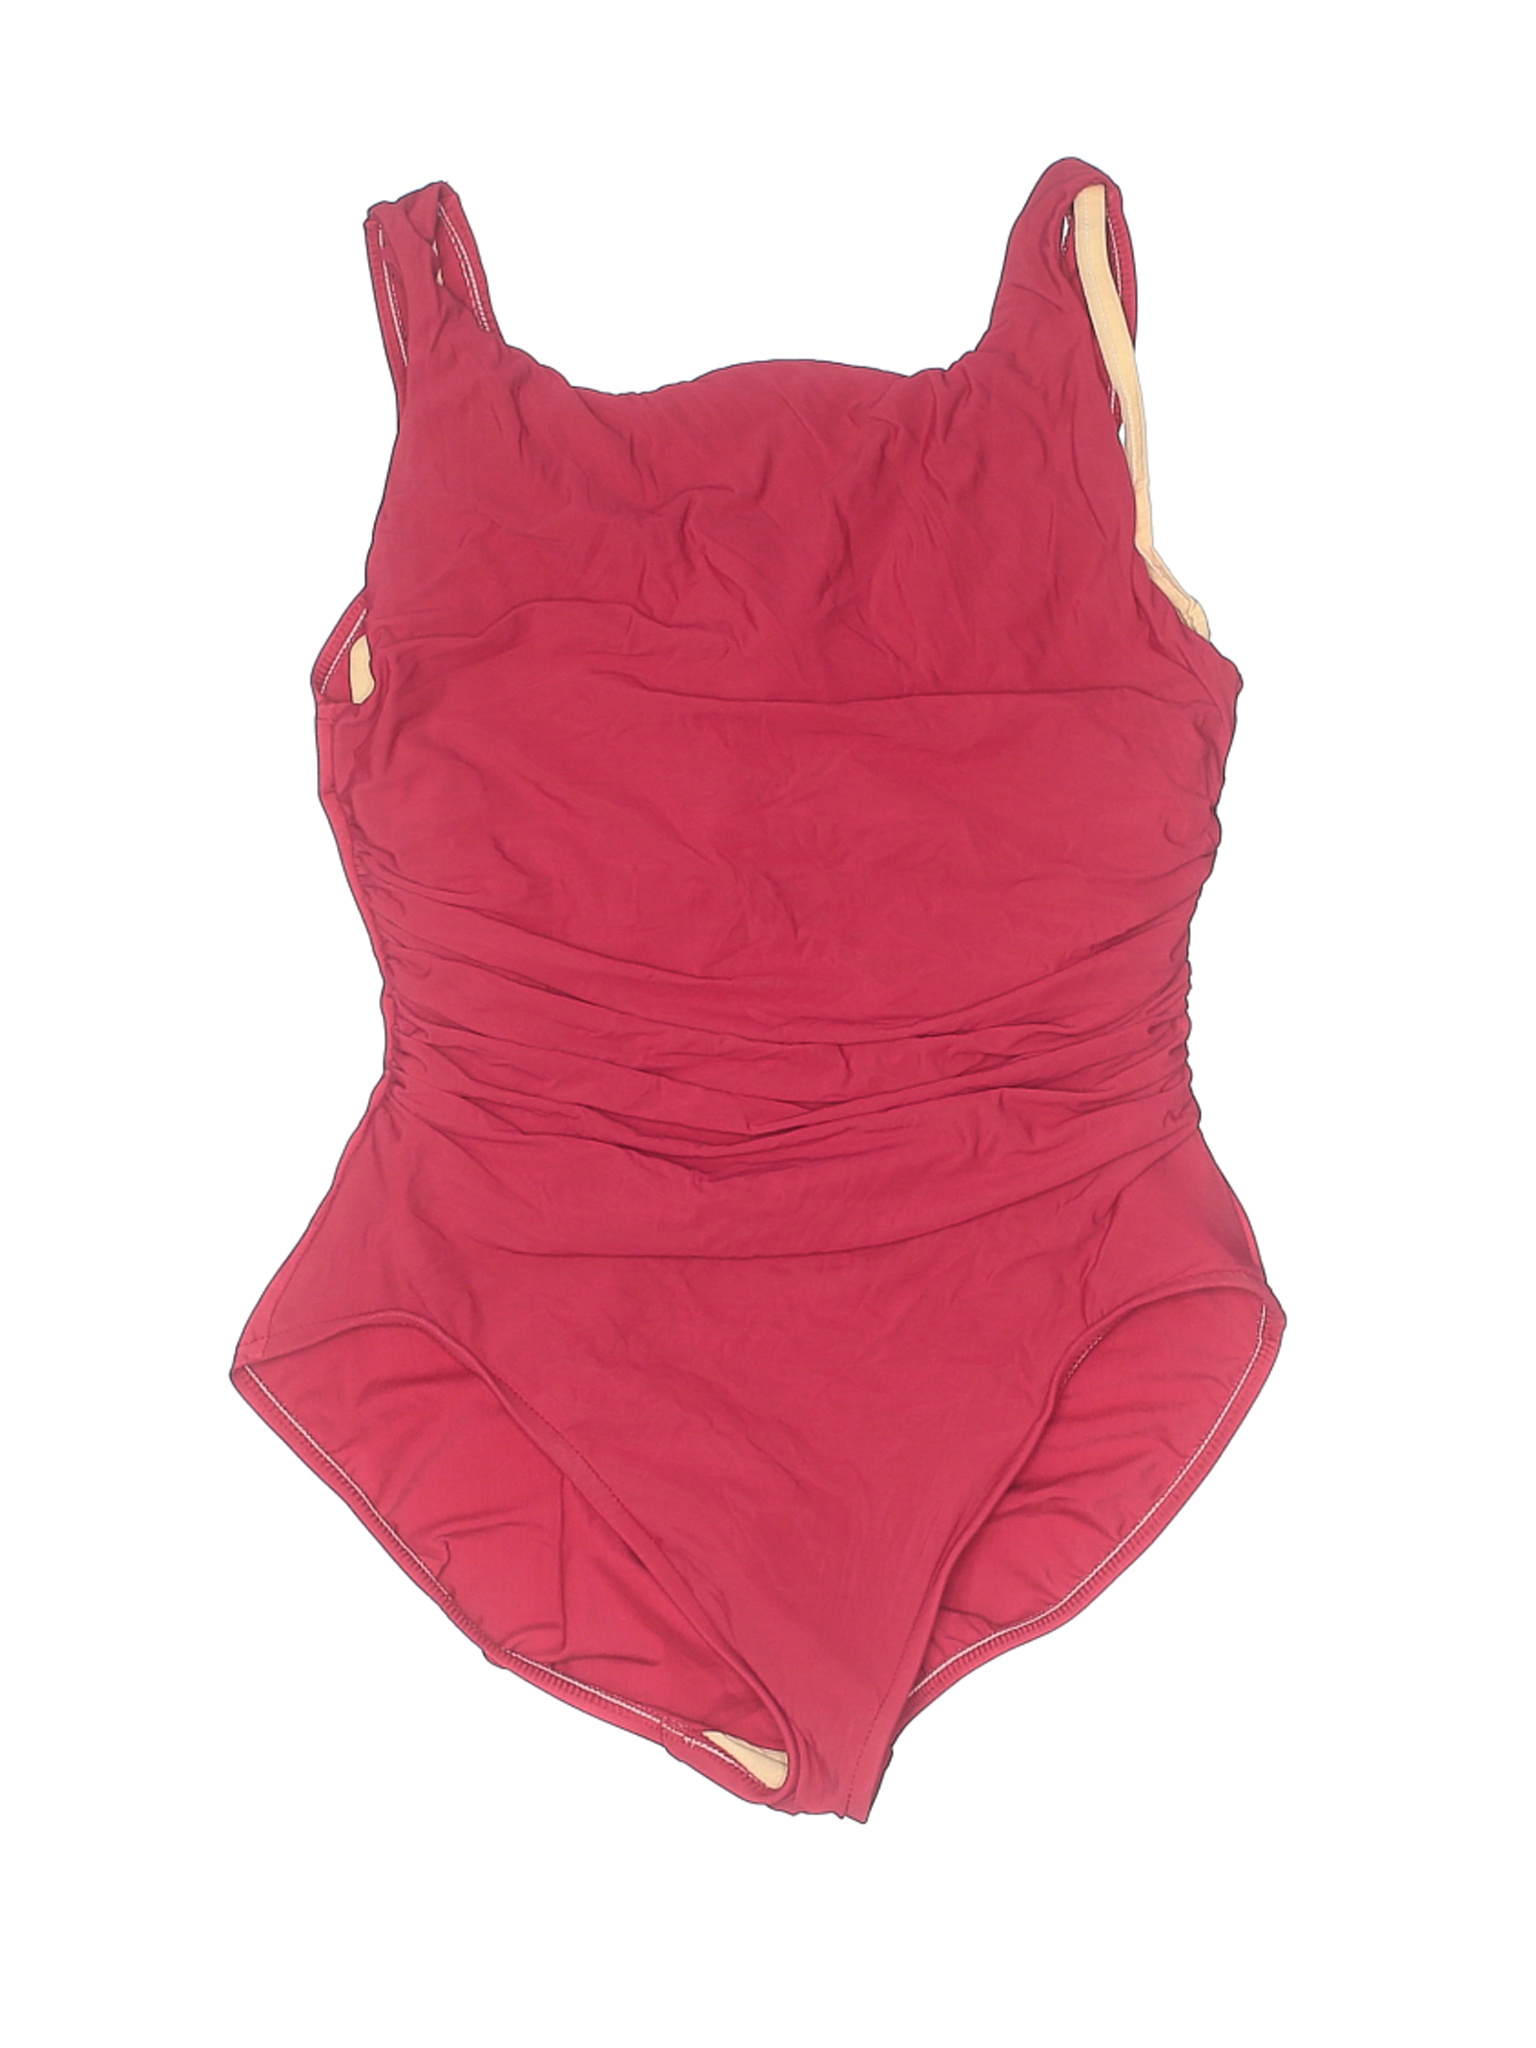 Miraclesuit Women Red One Piece Swimsuit 14 | eBay